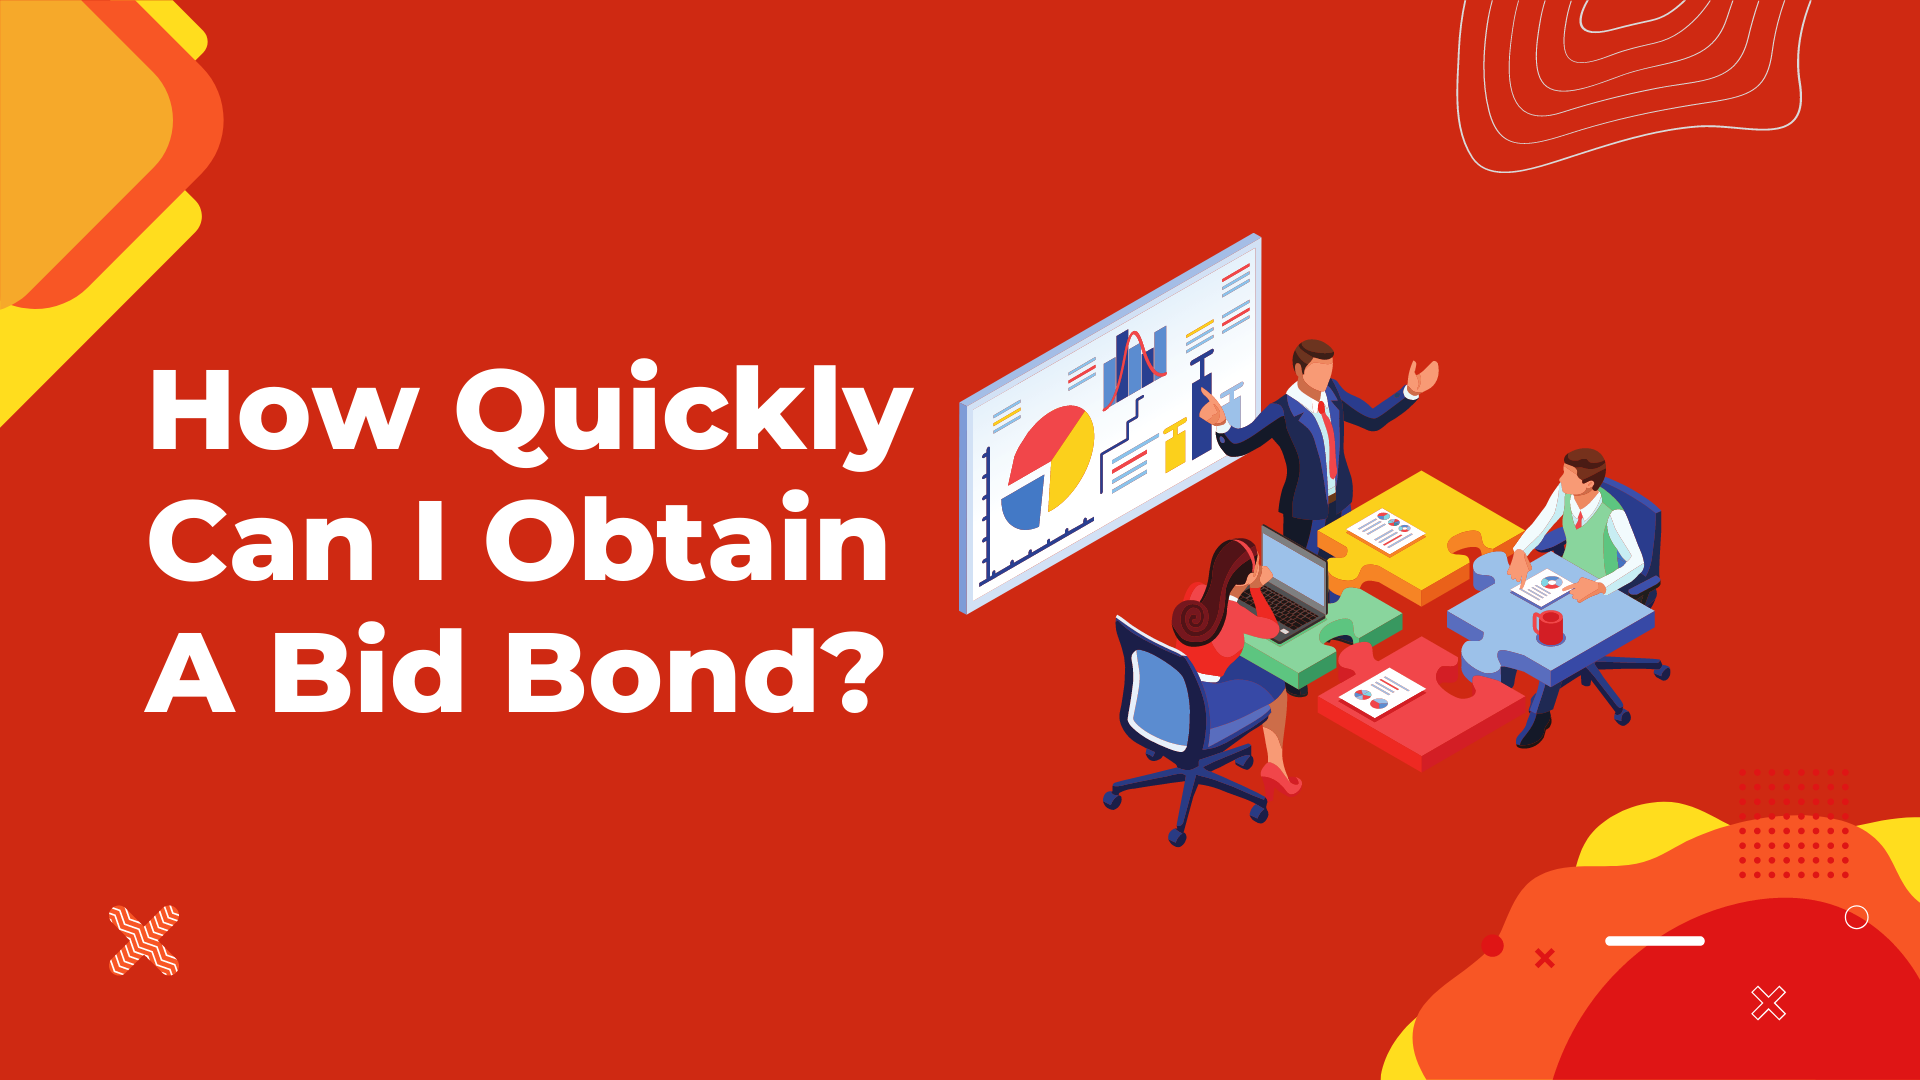 surety bond - What is a surety bond - animated people